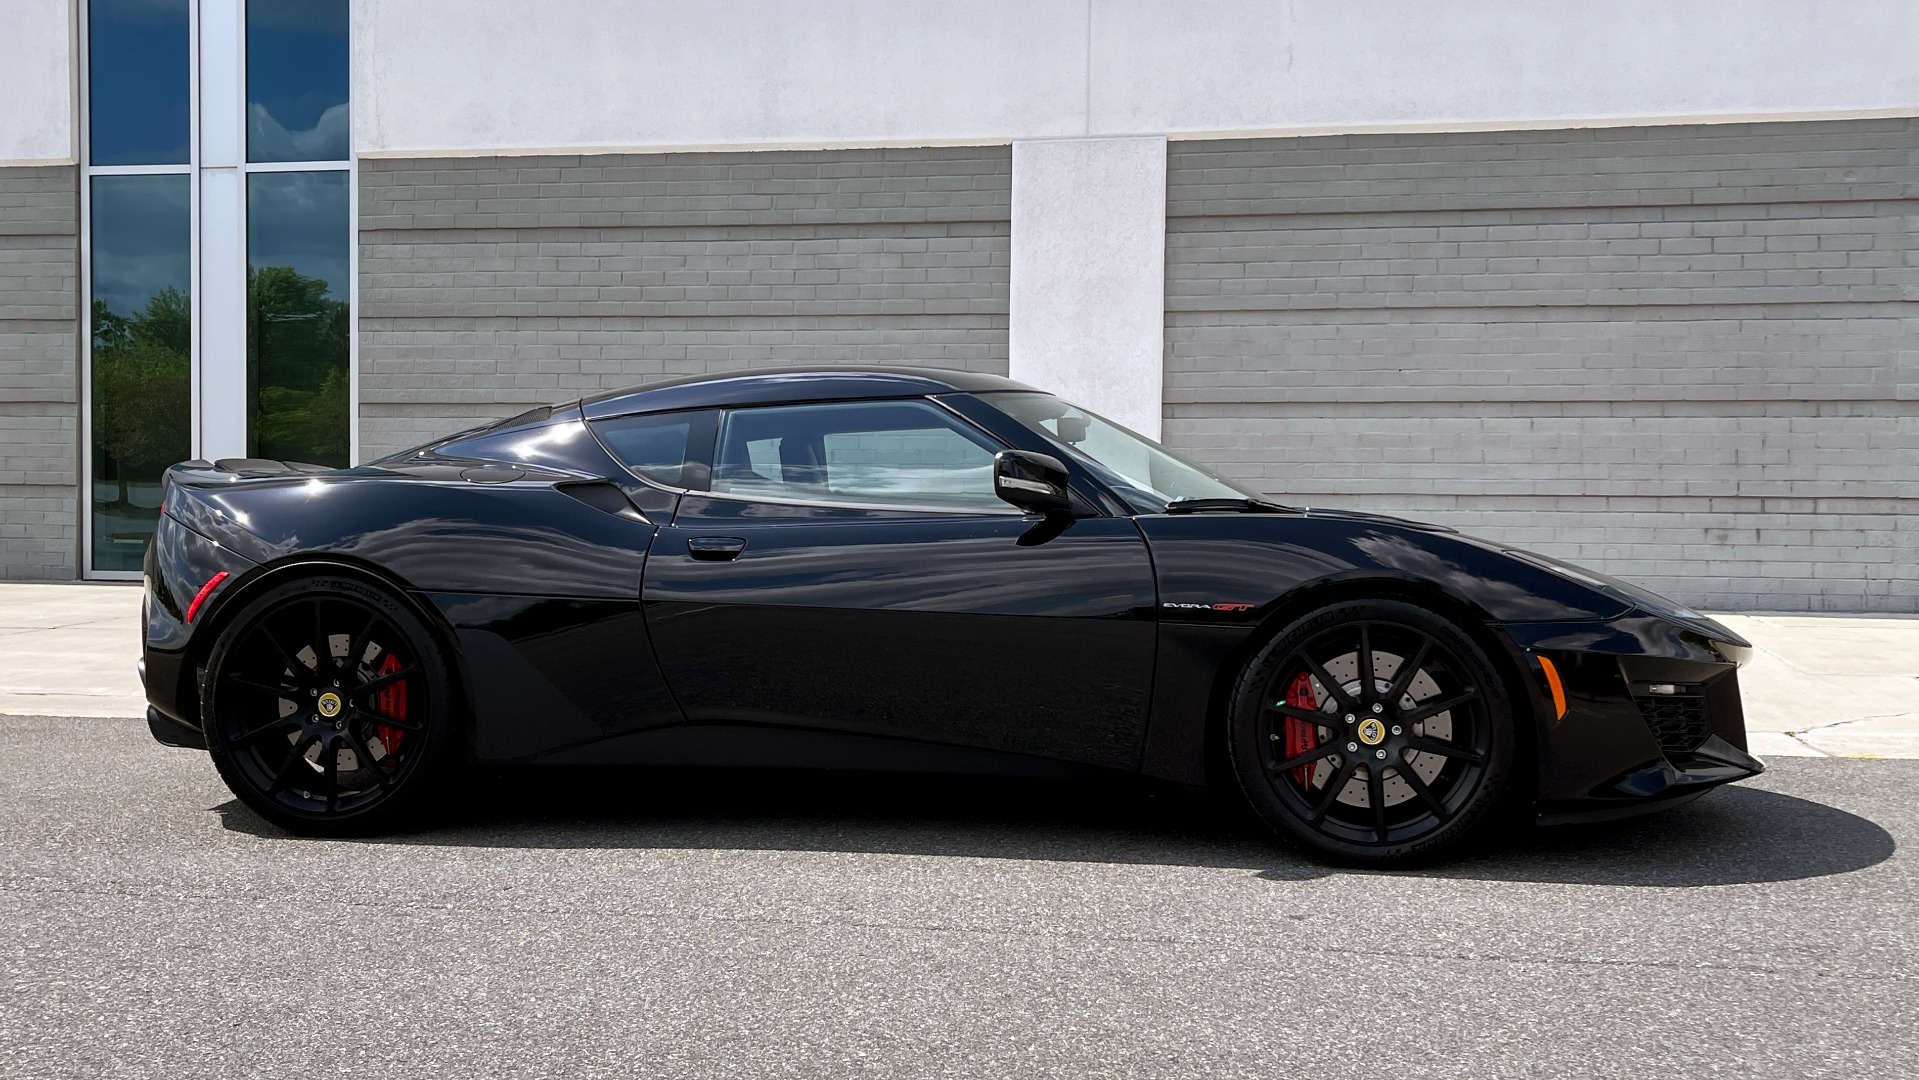 Used 2020 Lotus EVORA GT COUPE / 3.5L SC / NAV / ALPINE SND W/SUBWOOFER / REARVIEW for sale $102,895 at Formula Imports in Charlotte NC 28227 9